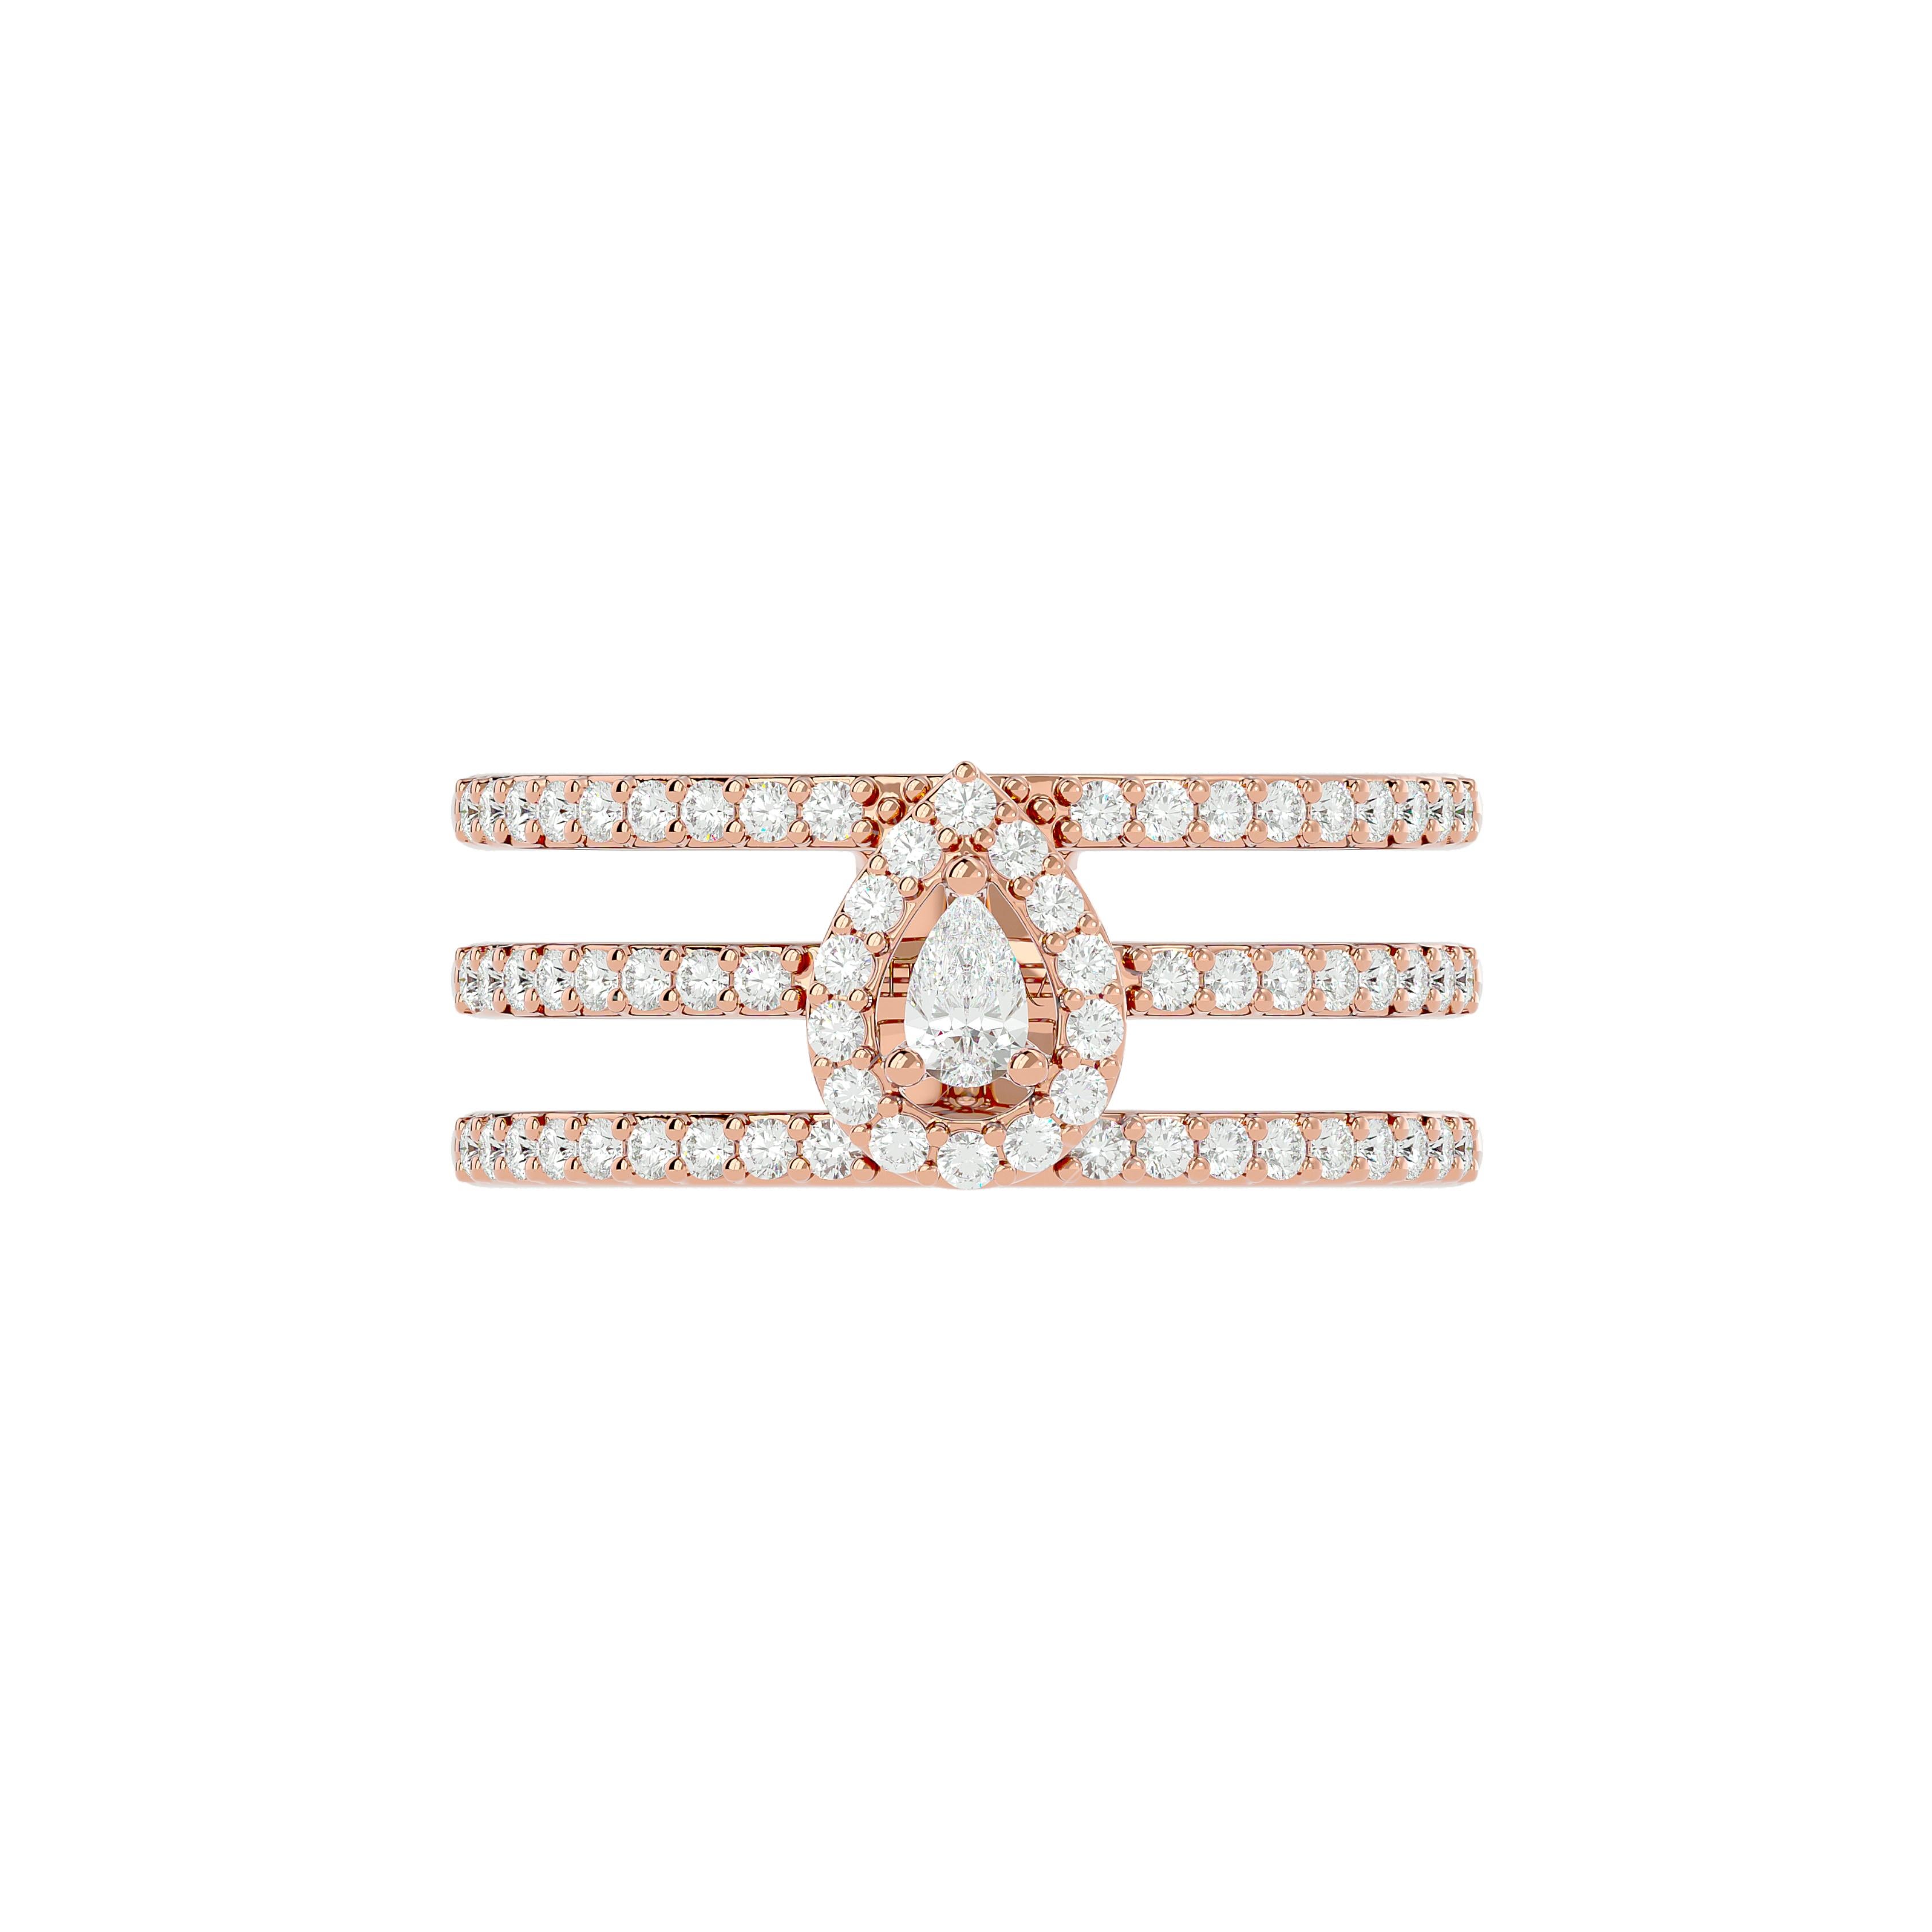 Elements
Pear-Shaped Diamond Wedding Rings are a classic choice for brides, and this one is sure to make you shine on your special day. The sparkling diamonds and soft touch of gold make it perfect for every occasion.

Innovation
Symbolizing